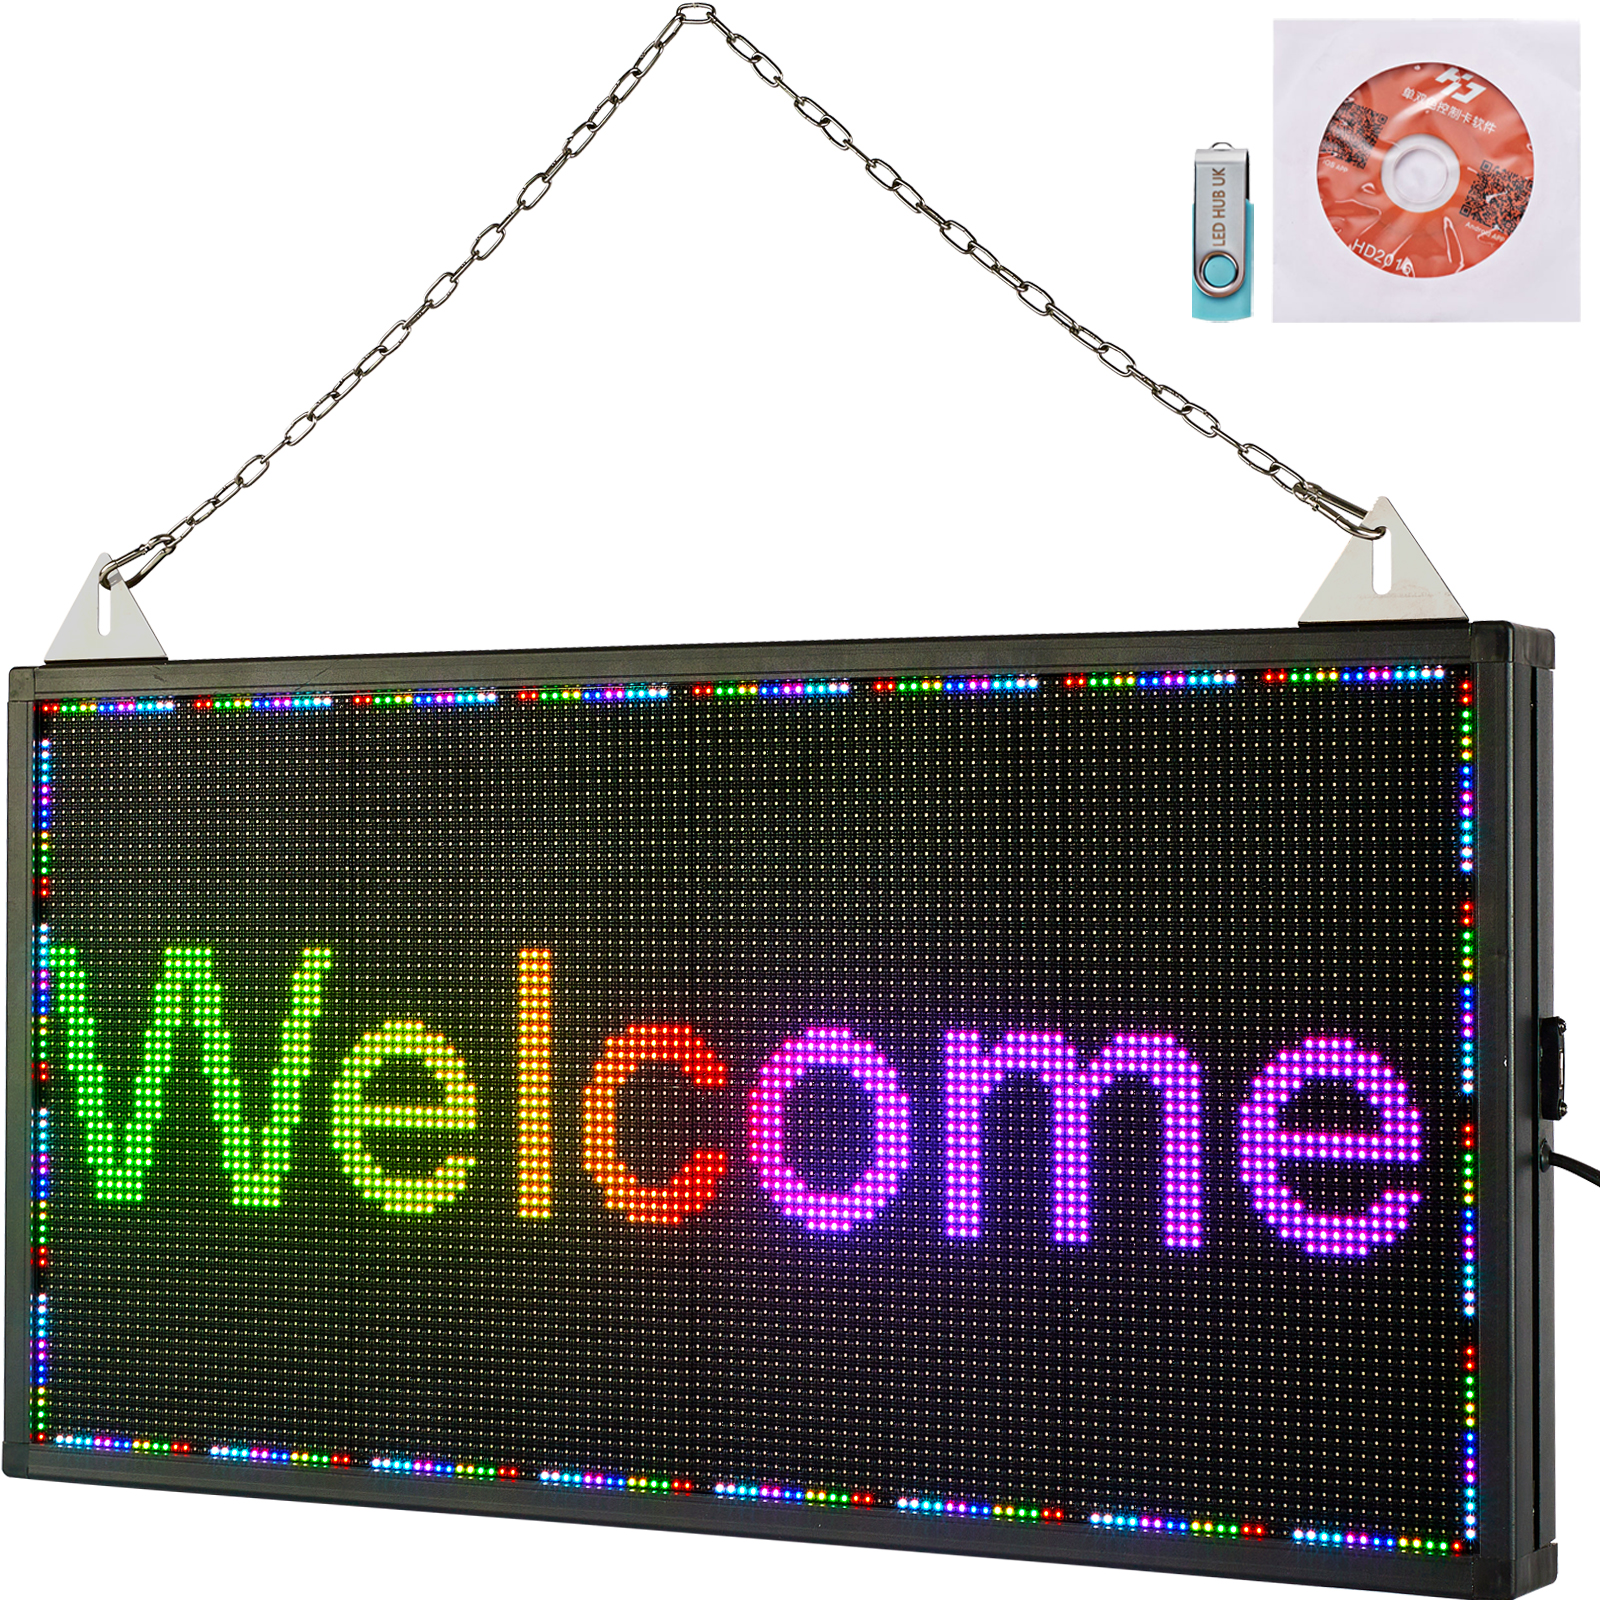 Scrolling Sign,14x8 in,Full Color